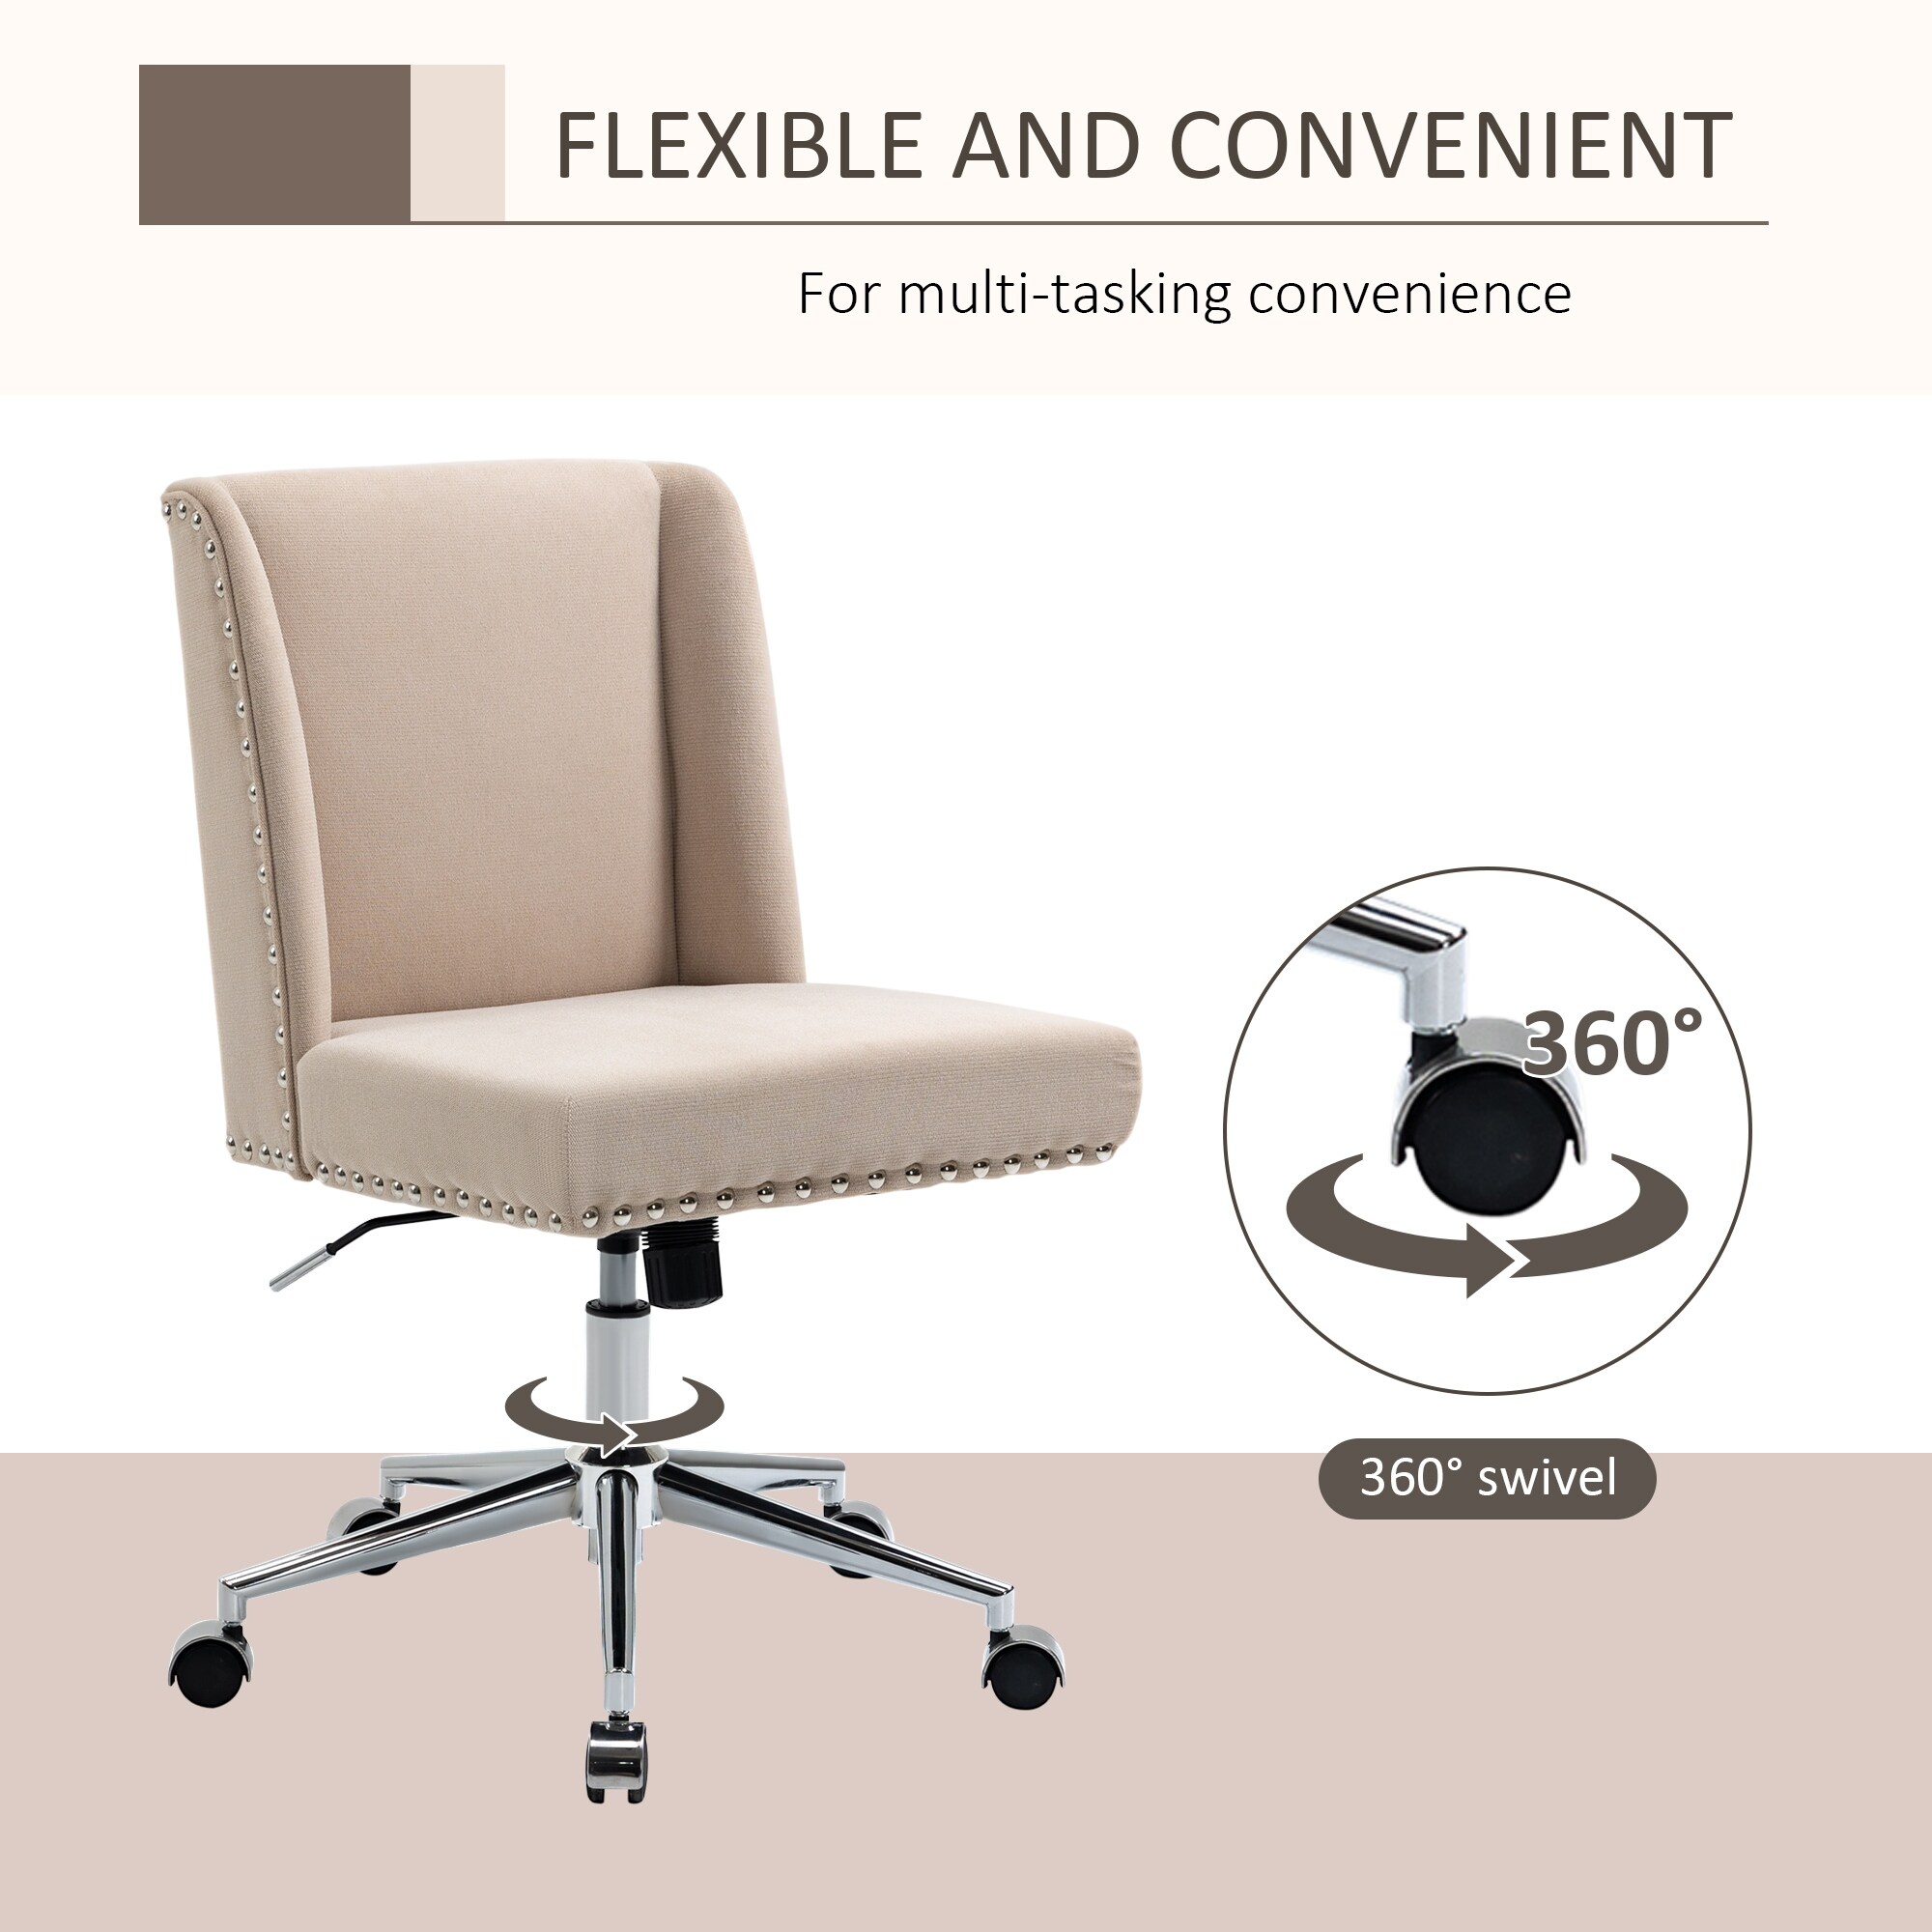 https://ak1.ostkcdn.com/images/products/is/images/direct/e0b788cc7ffaad7fa5ba74464b101d022714877c/Vinsetto-Ergonomic-Mid-Back-Computer-Office-Chair%2C-Task-Desk-360%C2%B0-Swivel-Rocking-Chair-w--Adjustable-Height.jpg